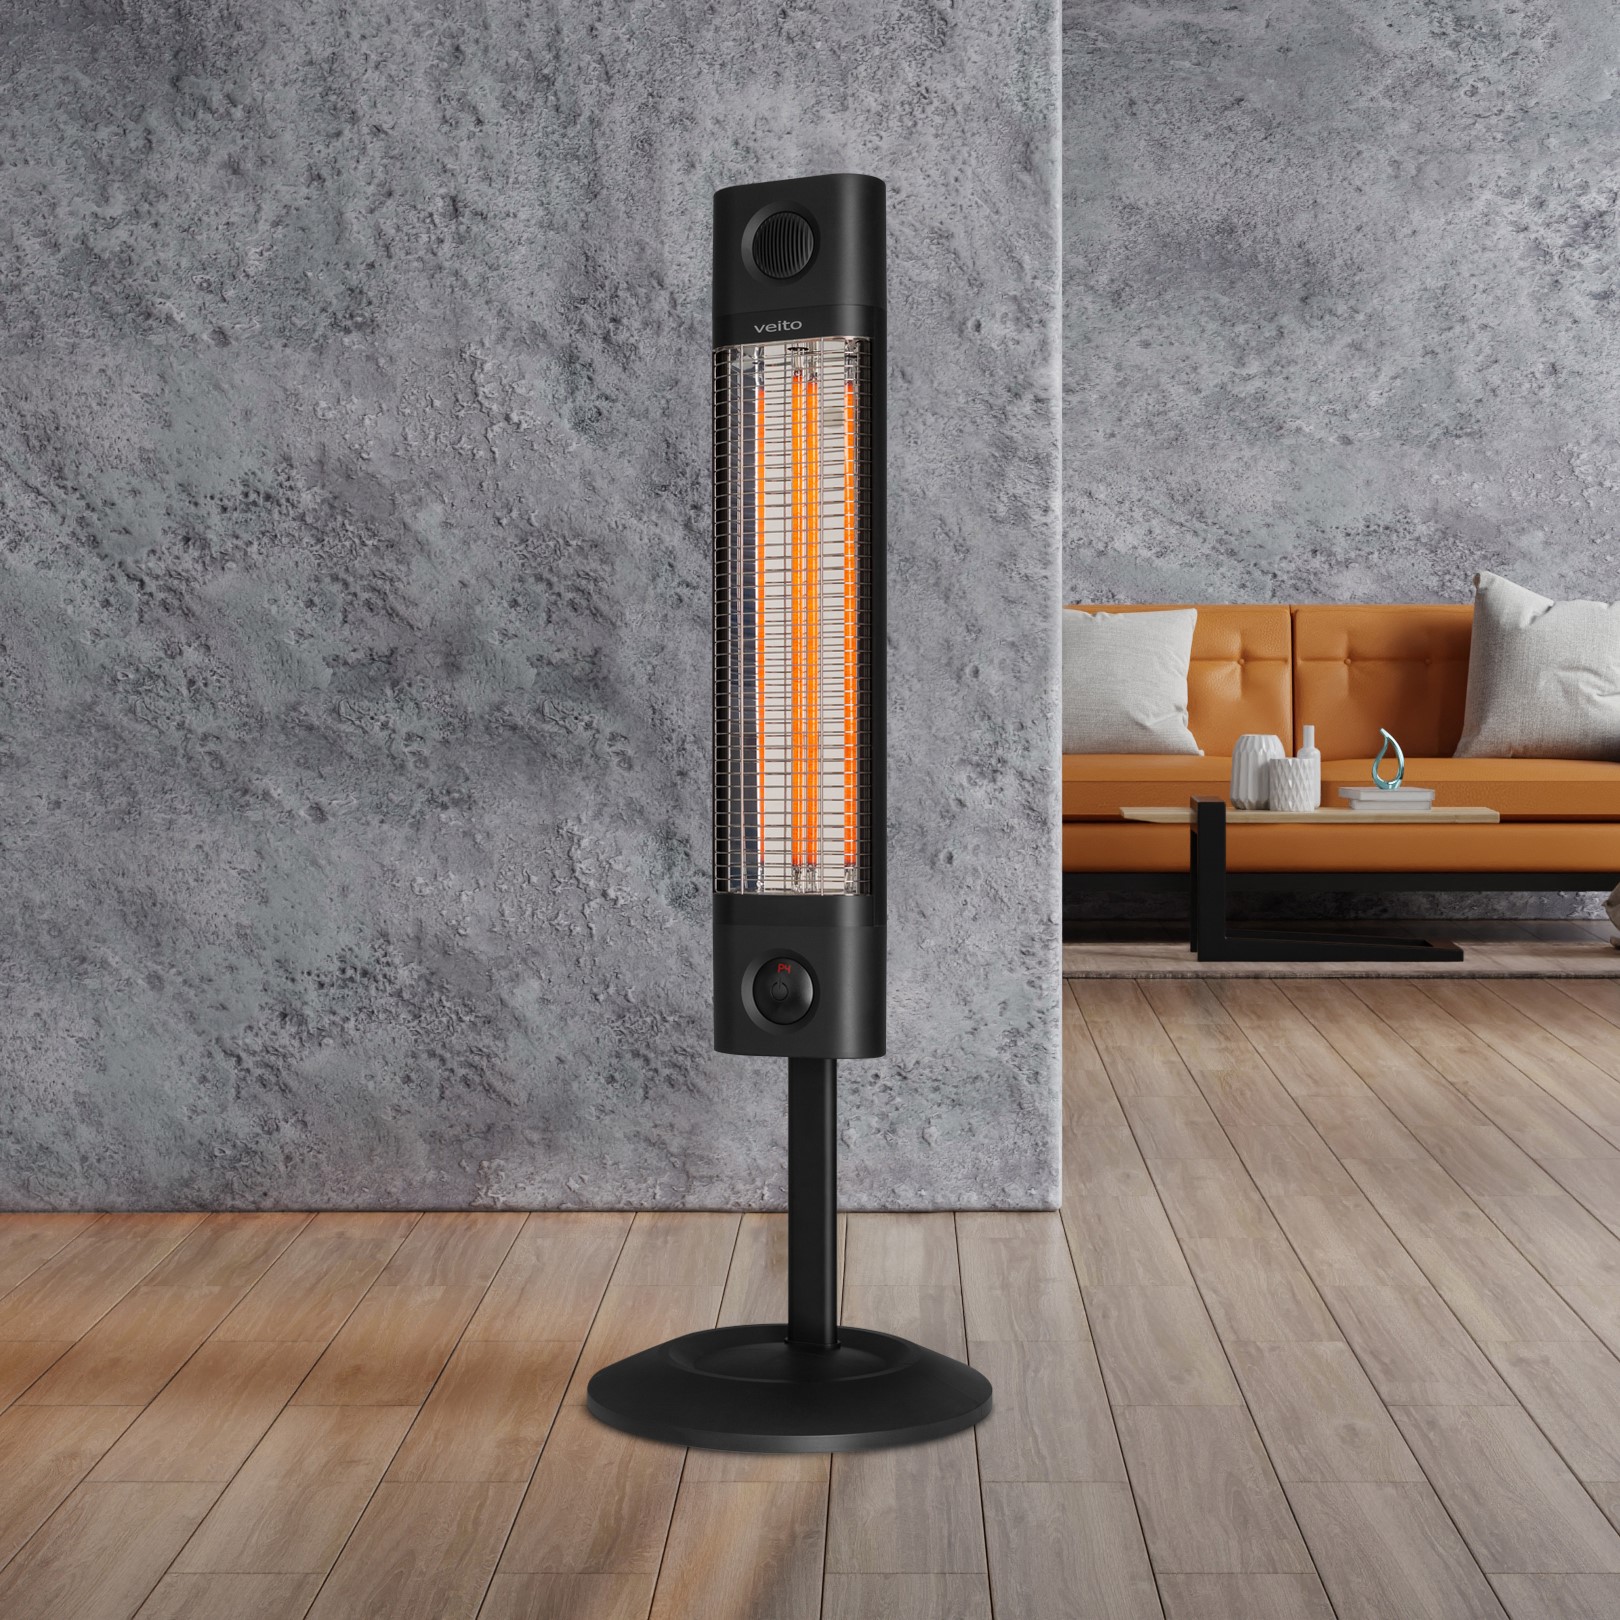 Veito CH1800RE Noir Free Standing Energy Efficient Heater